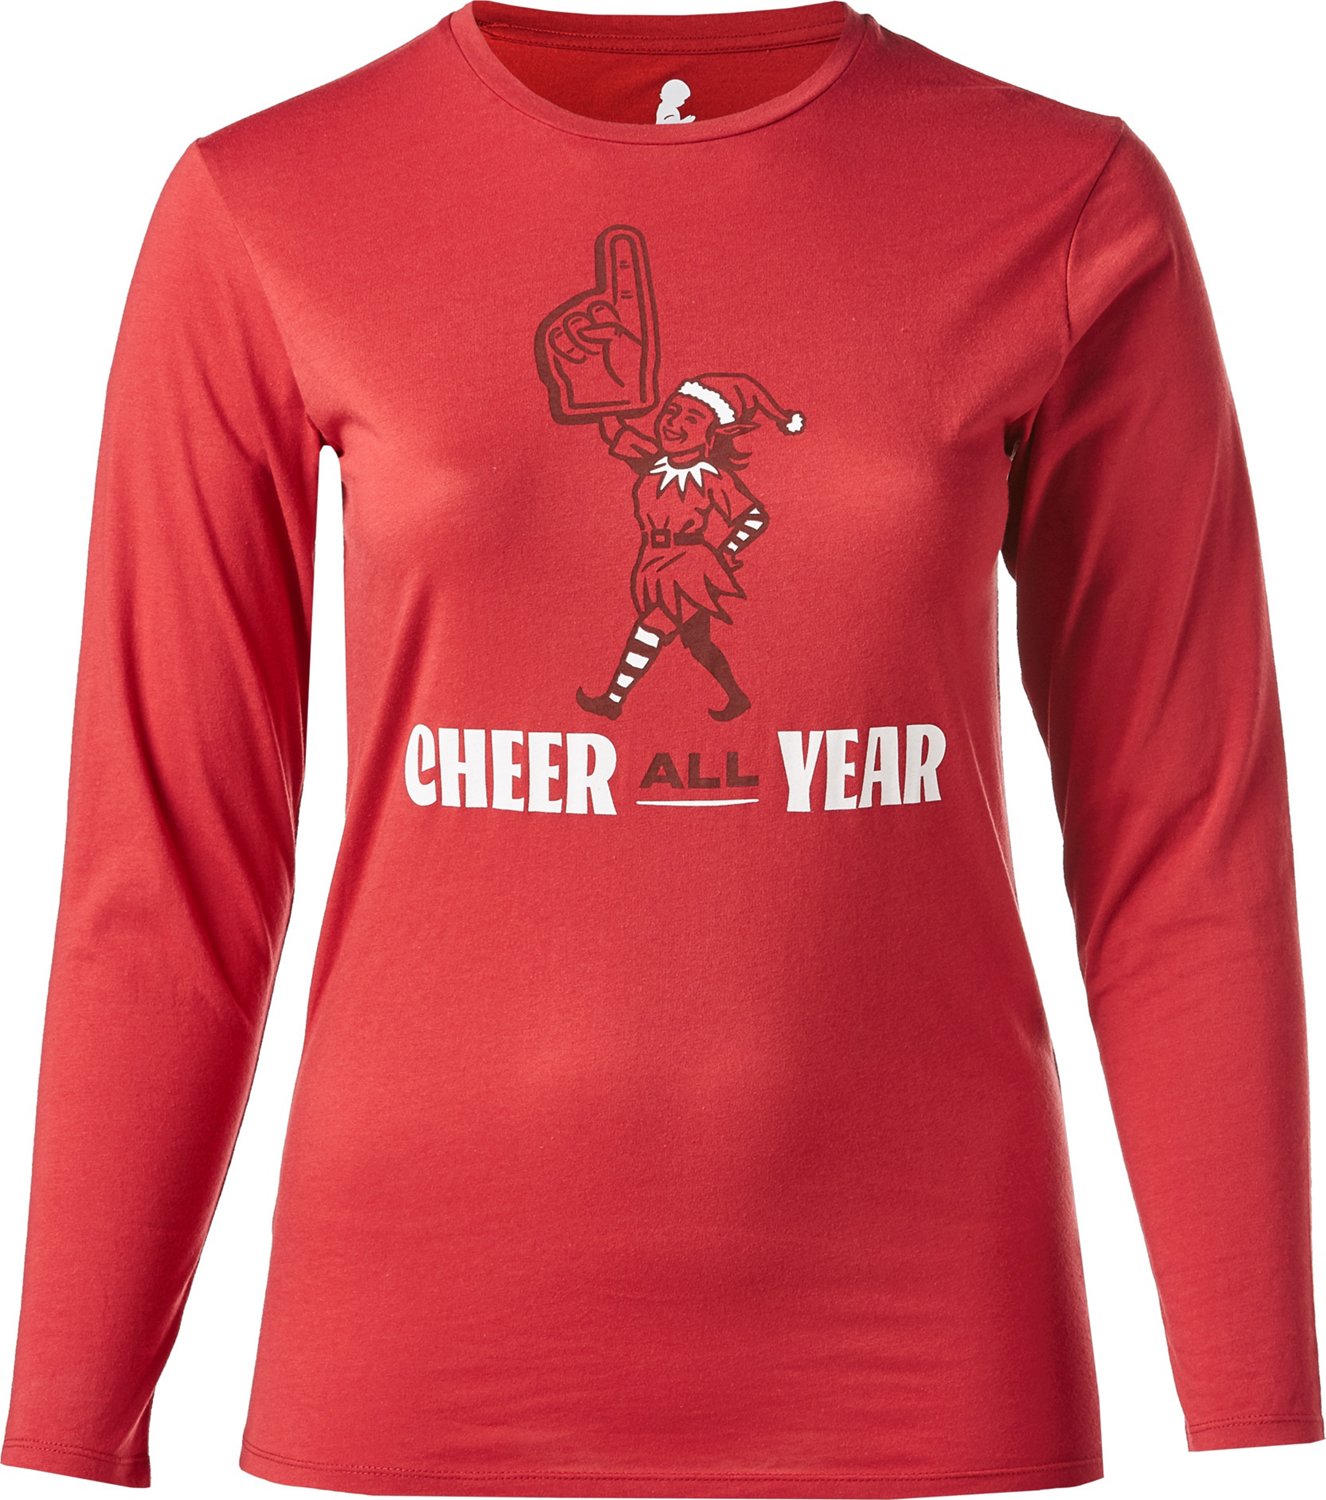 St. Jude's Children's Research Hospital Women's Cheer All Year Graphic ...